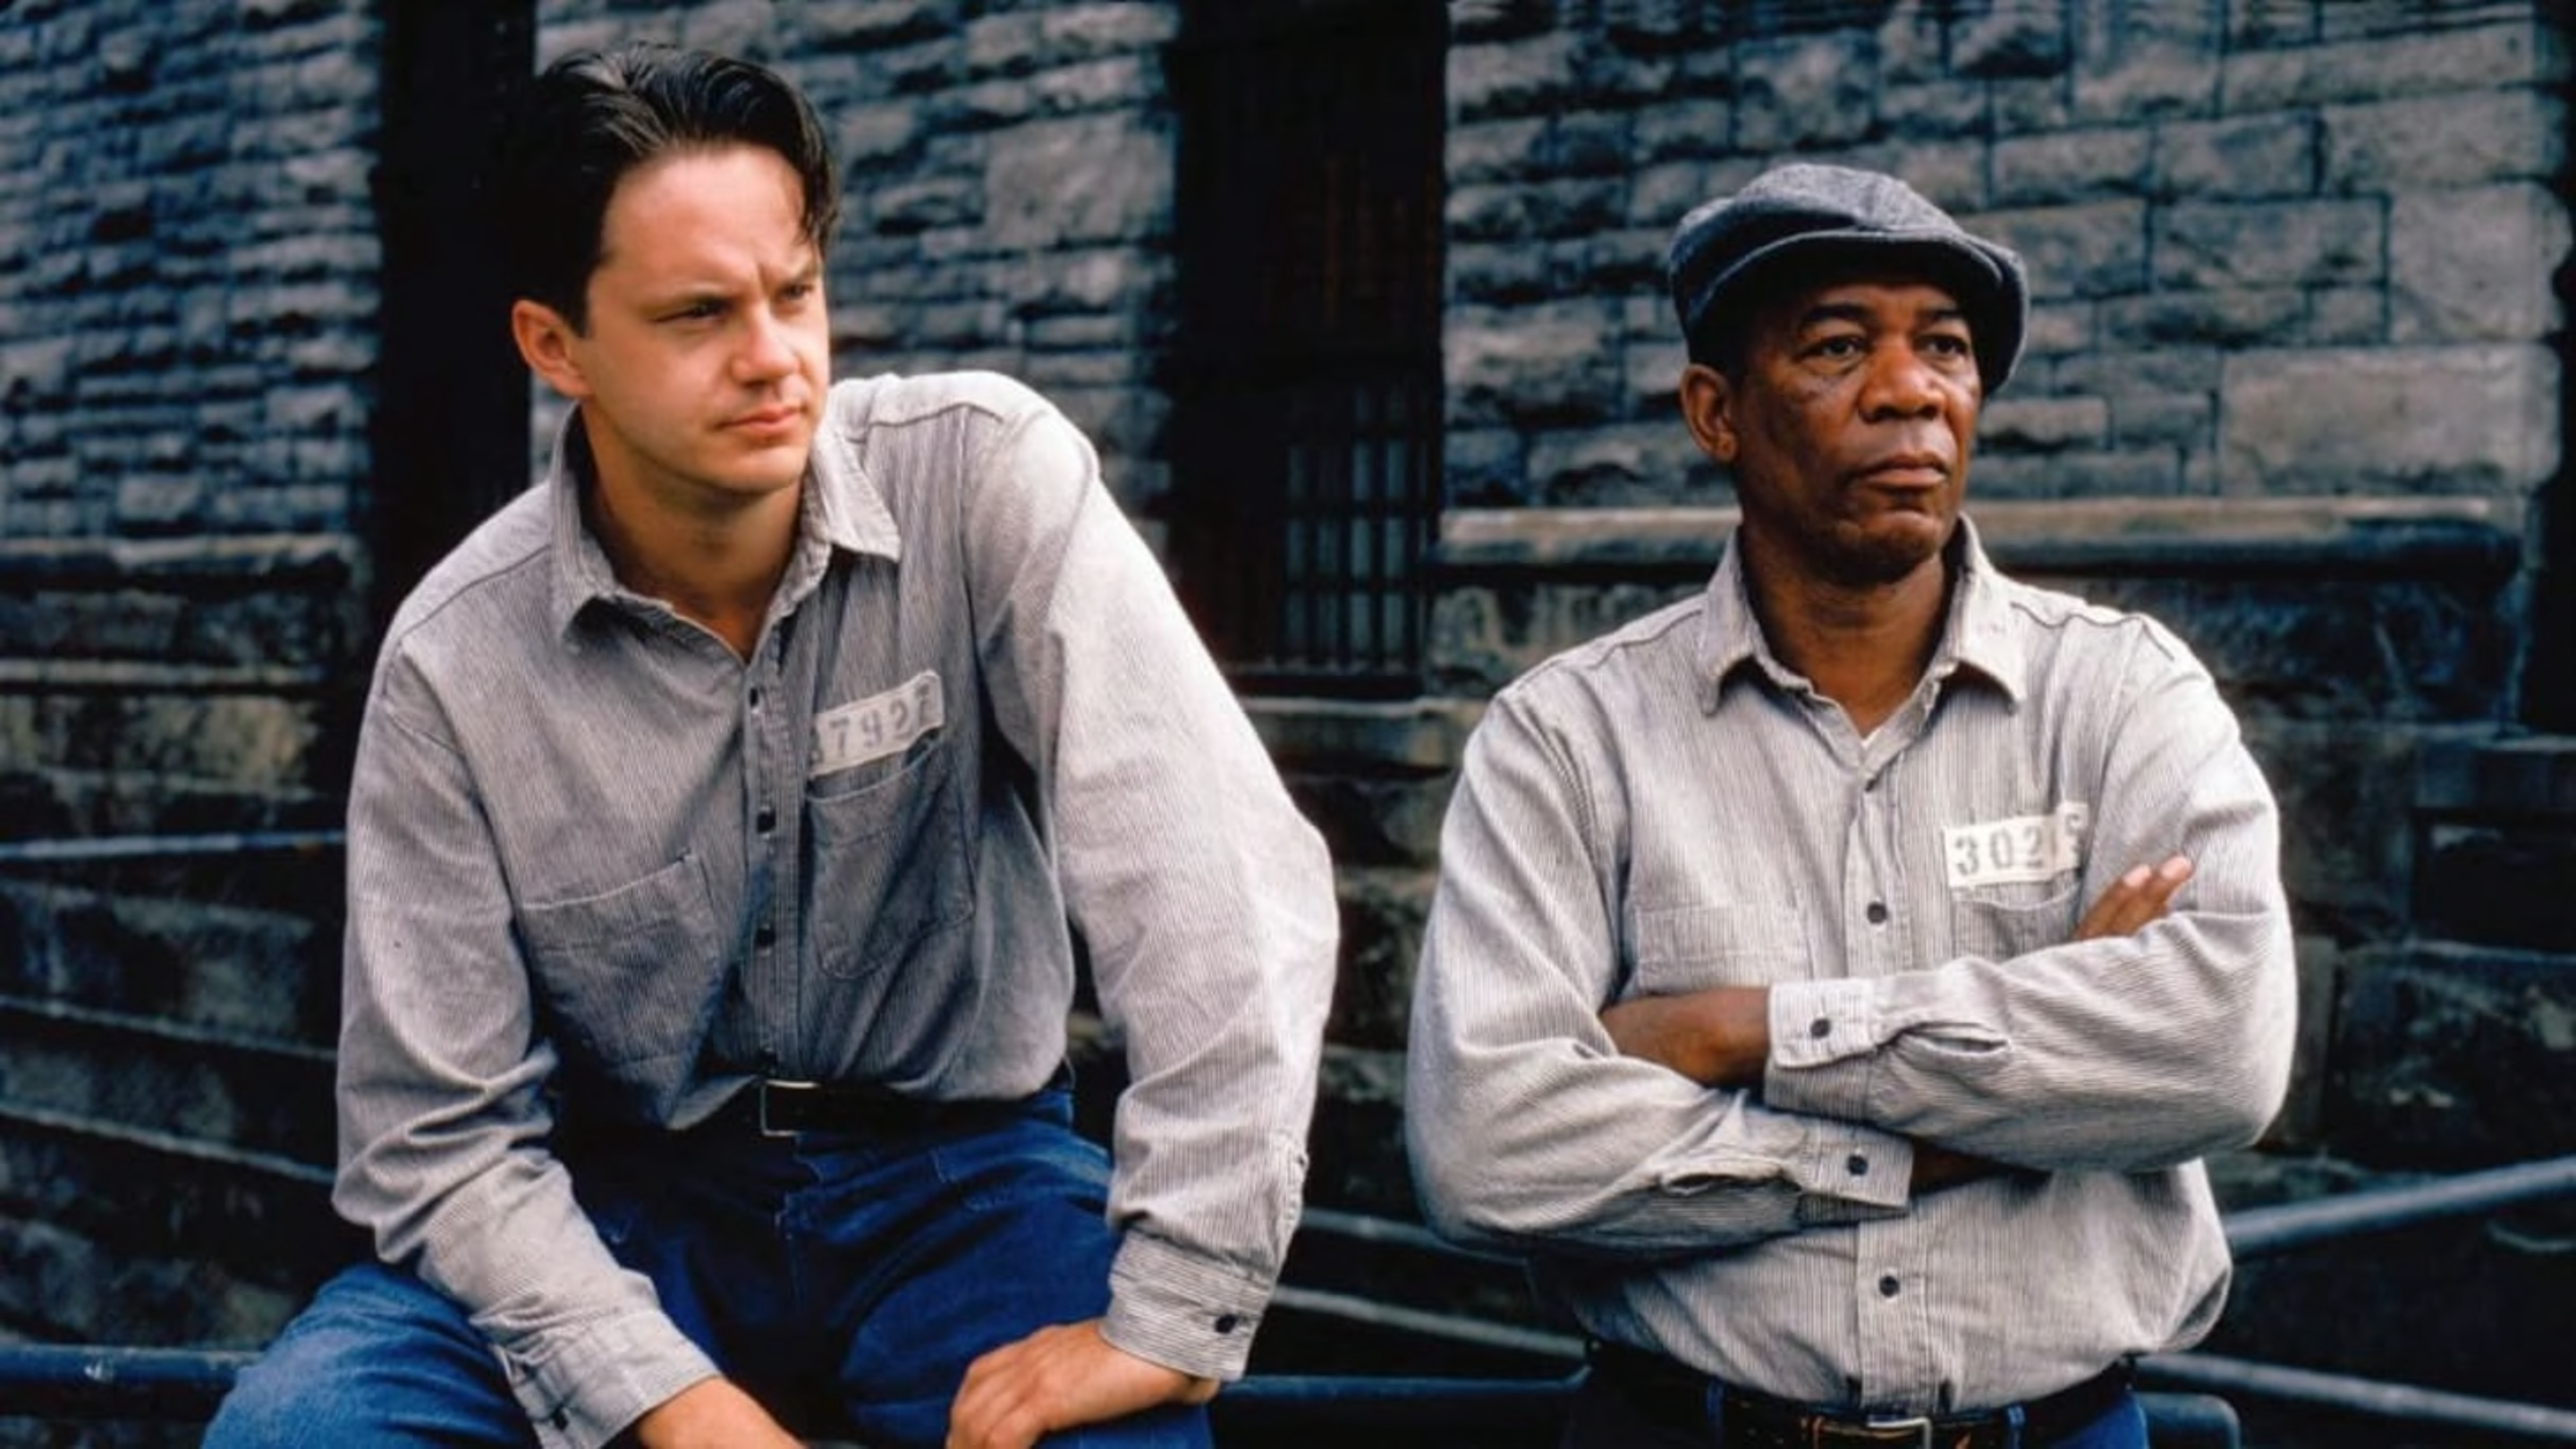 15 Things You Might Not Know About 'The Shawshank Redemption'